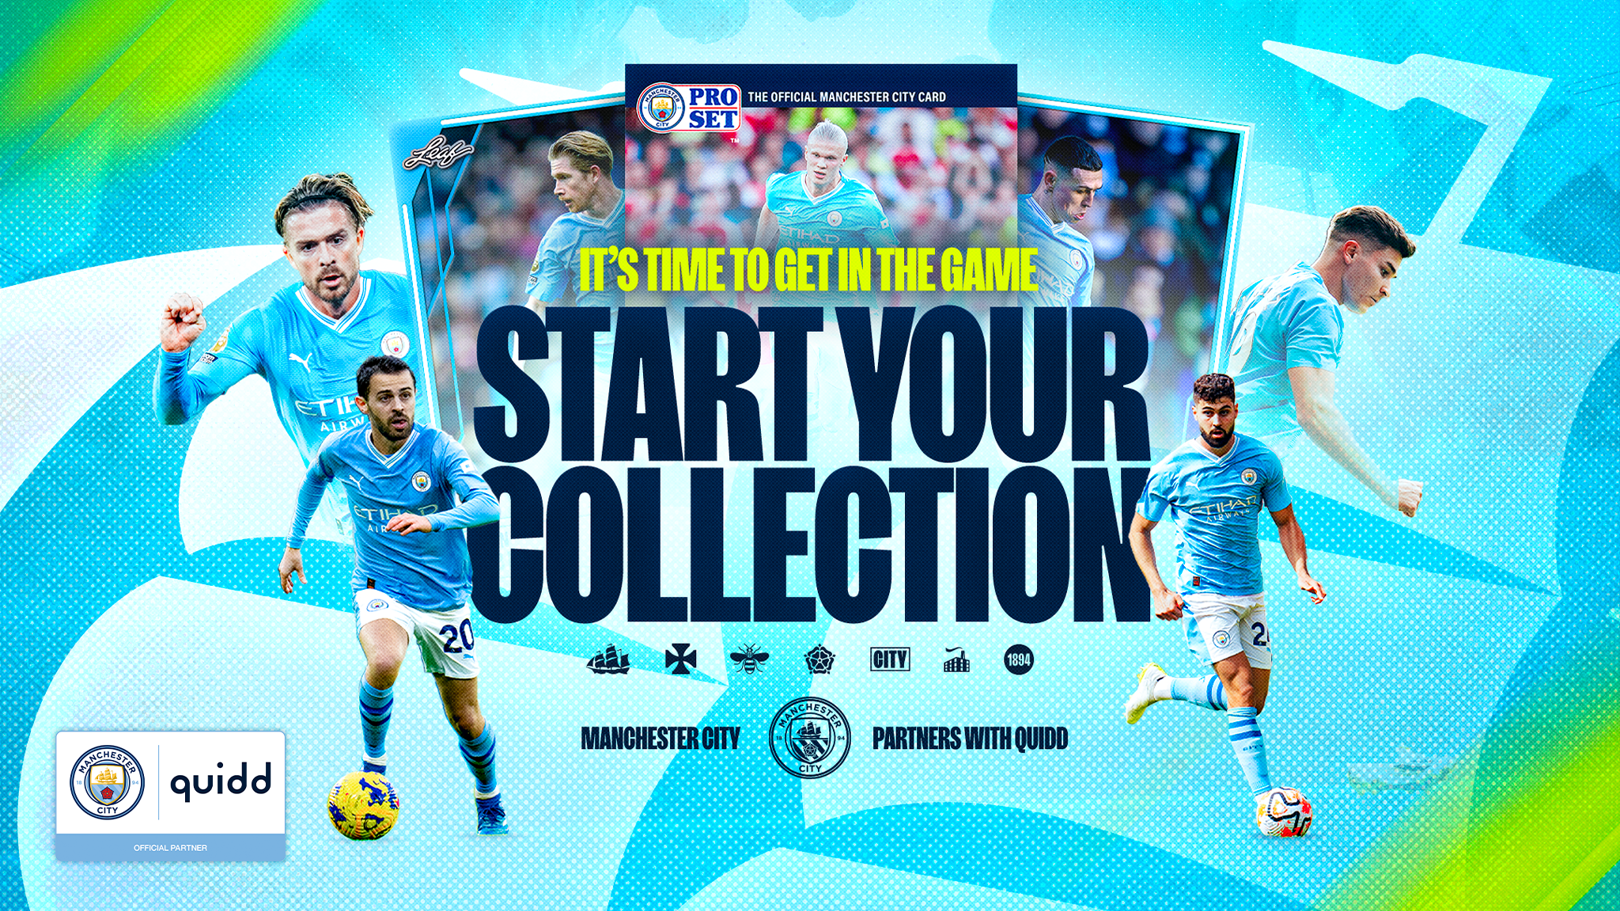 Manchester City Teams Up with Quidd for Digital Collectibles